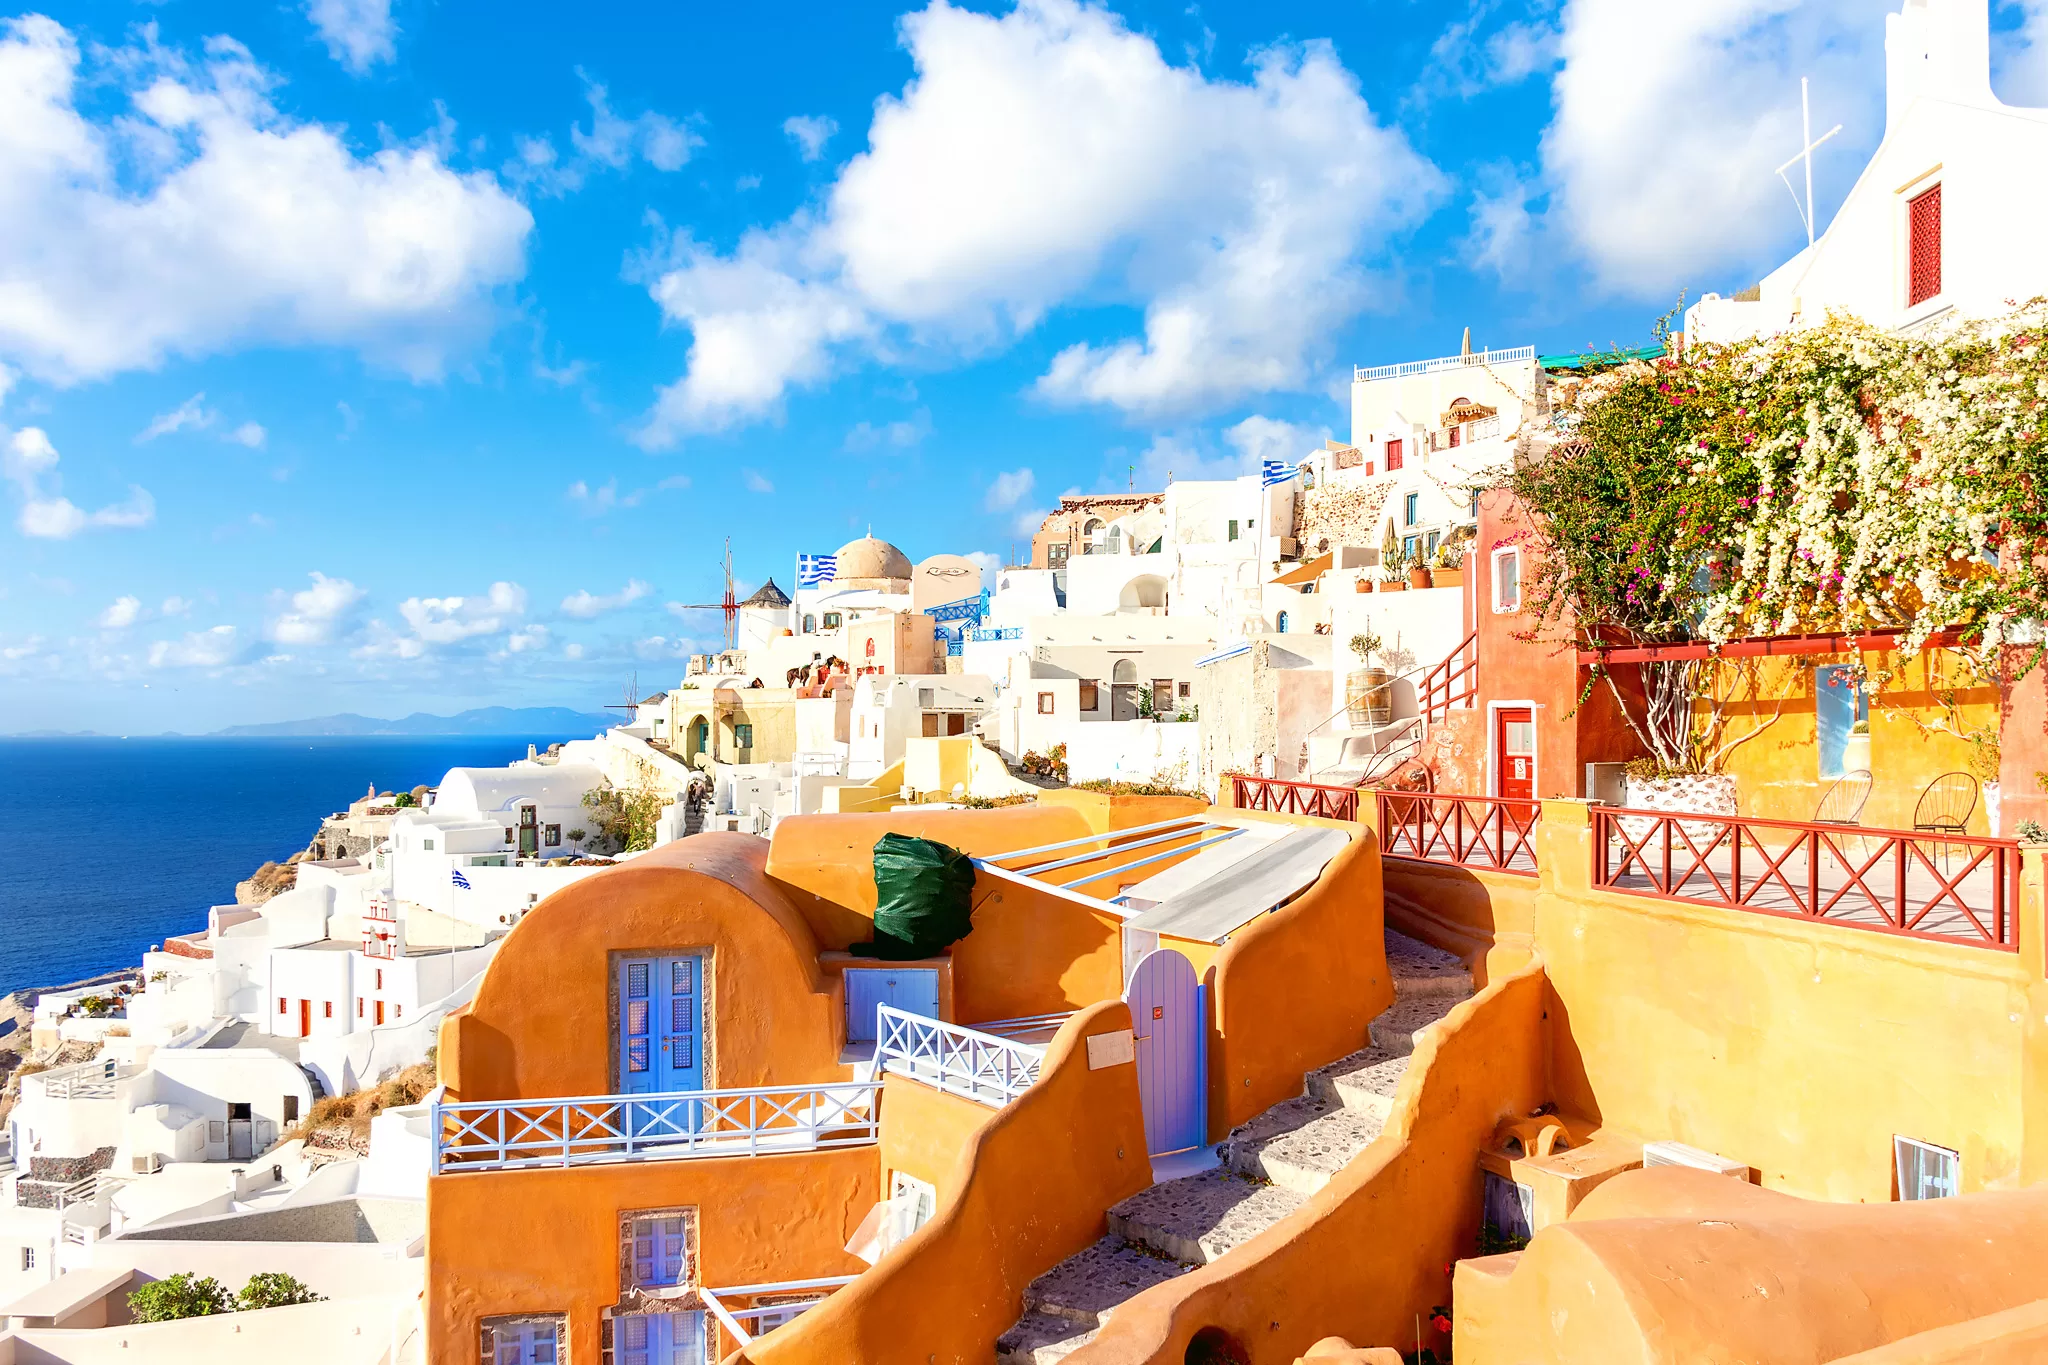 Photo of Oia on Santorini taken by Sarah Blevins. 